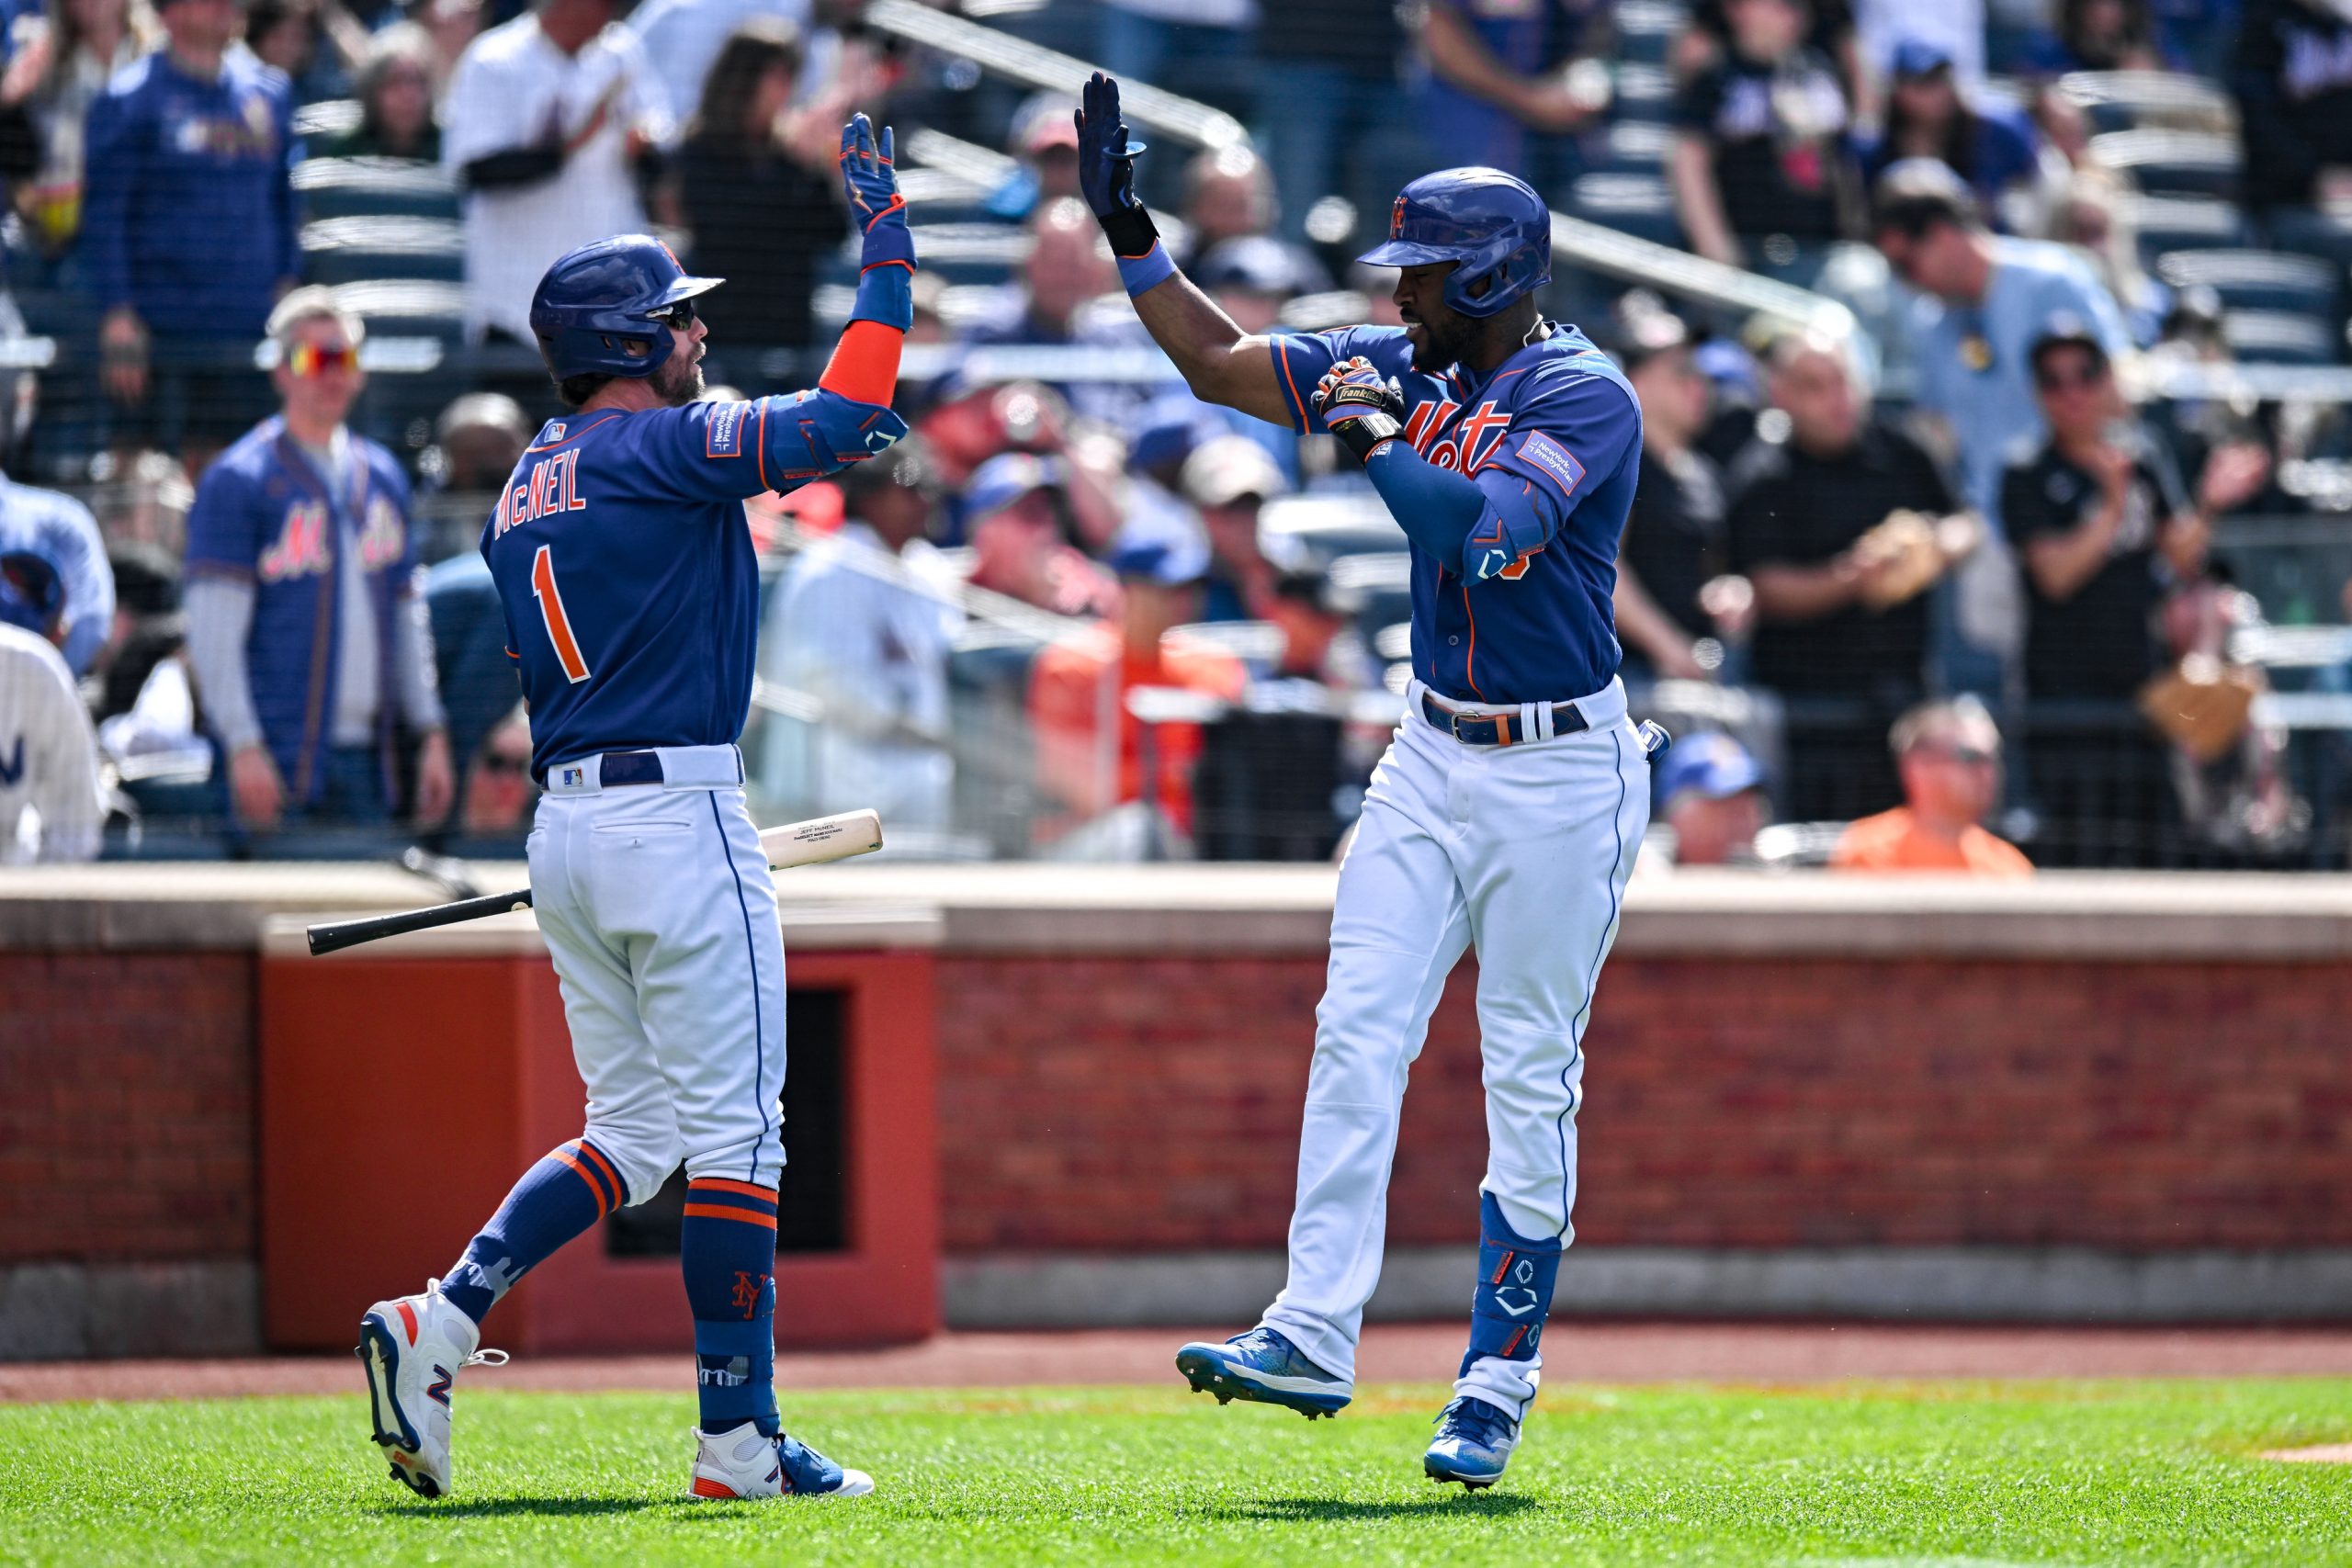 Mets' Starling Marte struggling through uneven start on bases